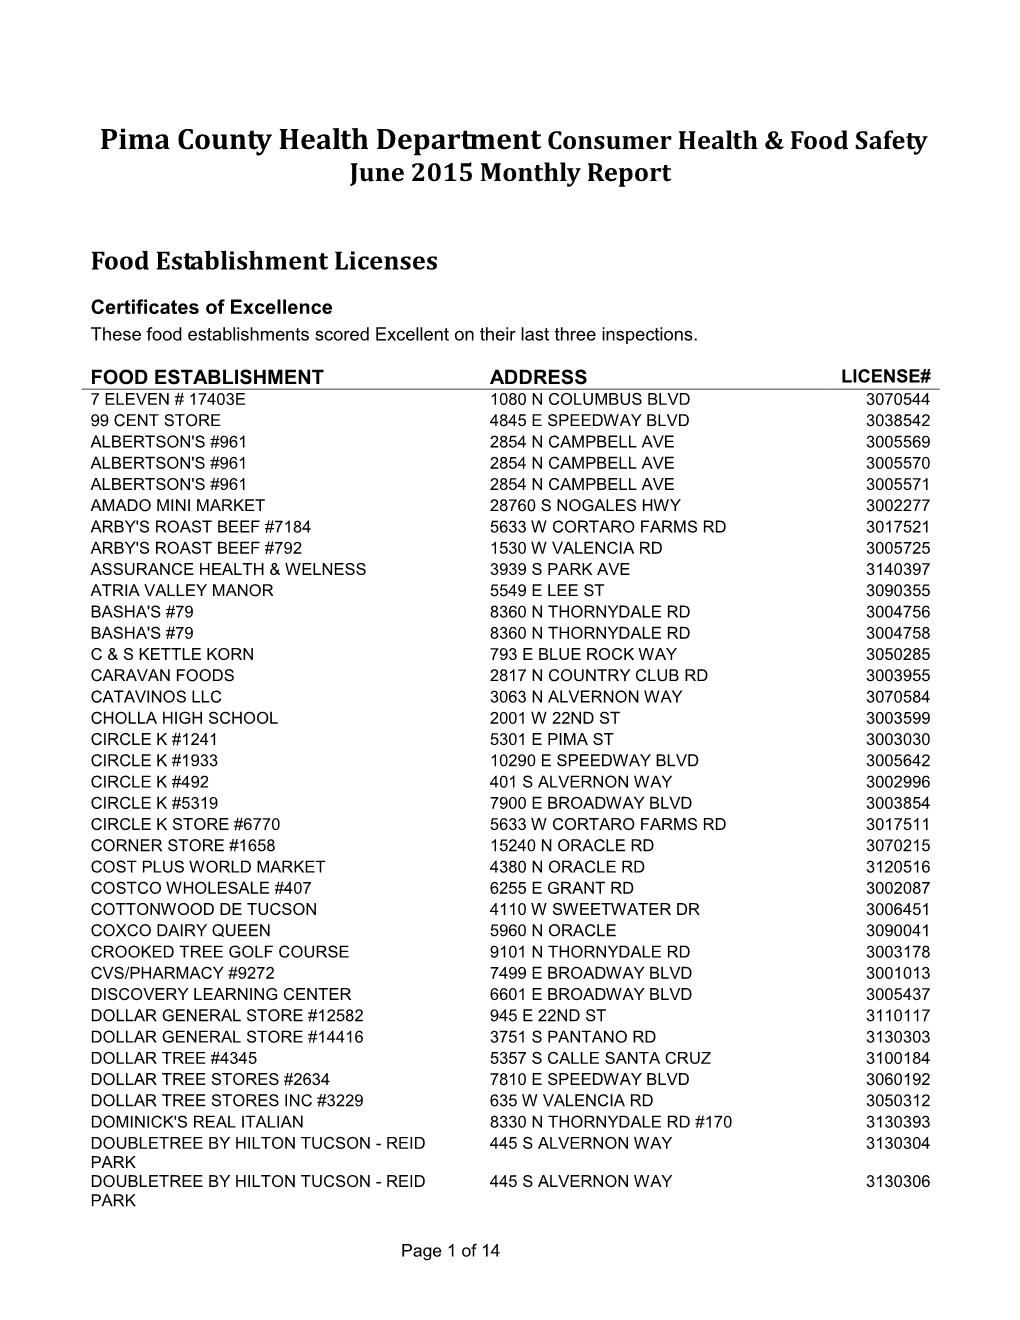 July, 1998, Monthly Report, Consumer Health & Food Safety